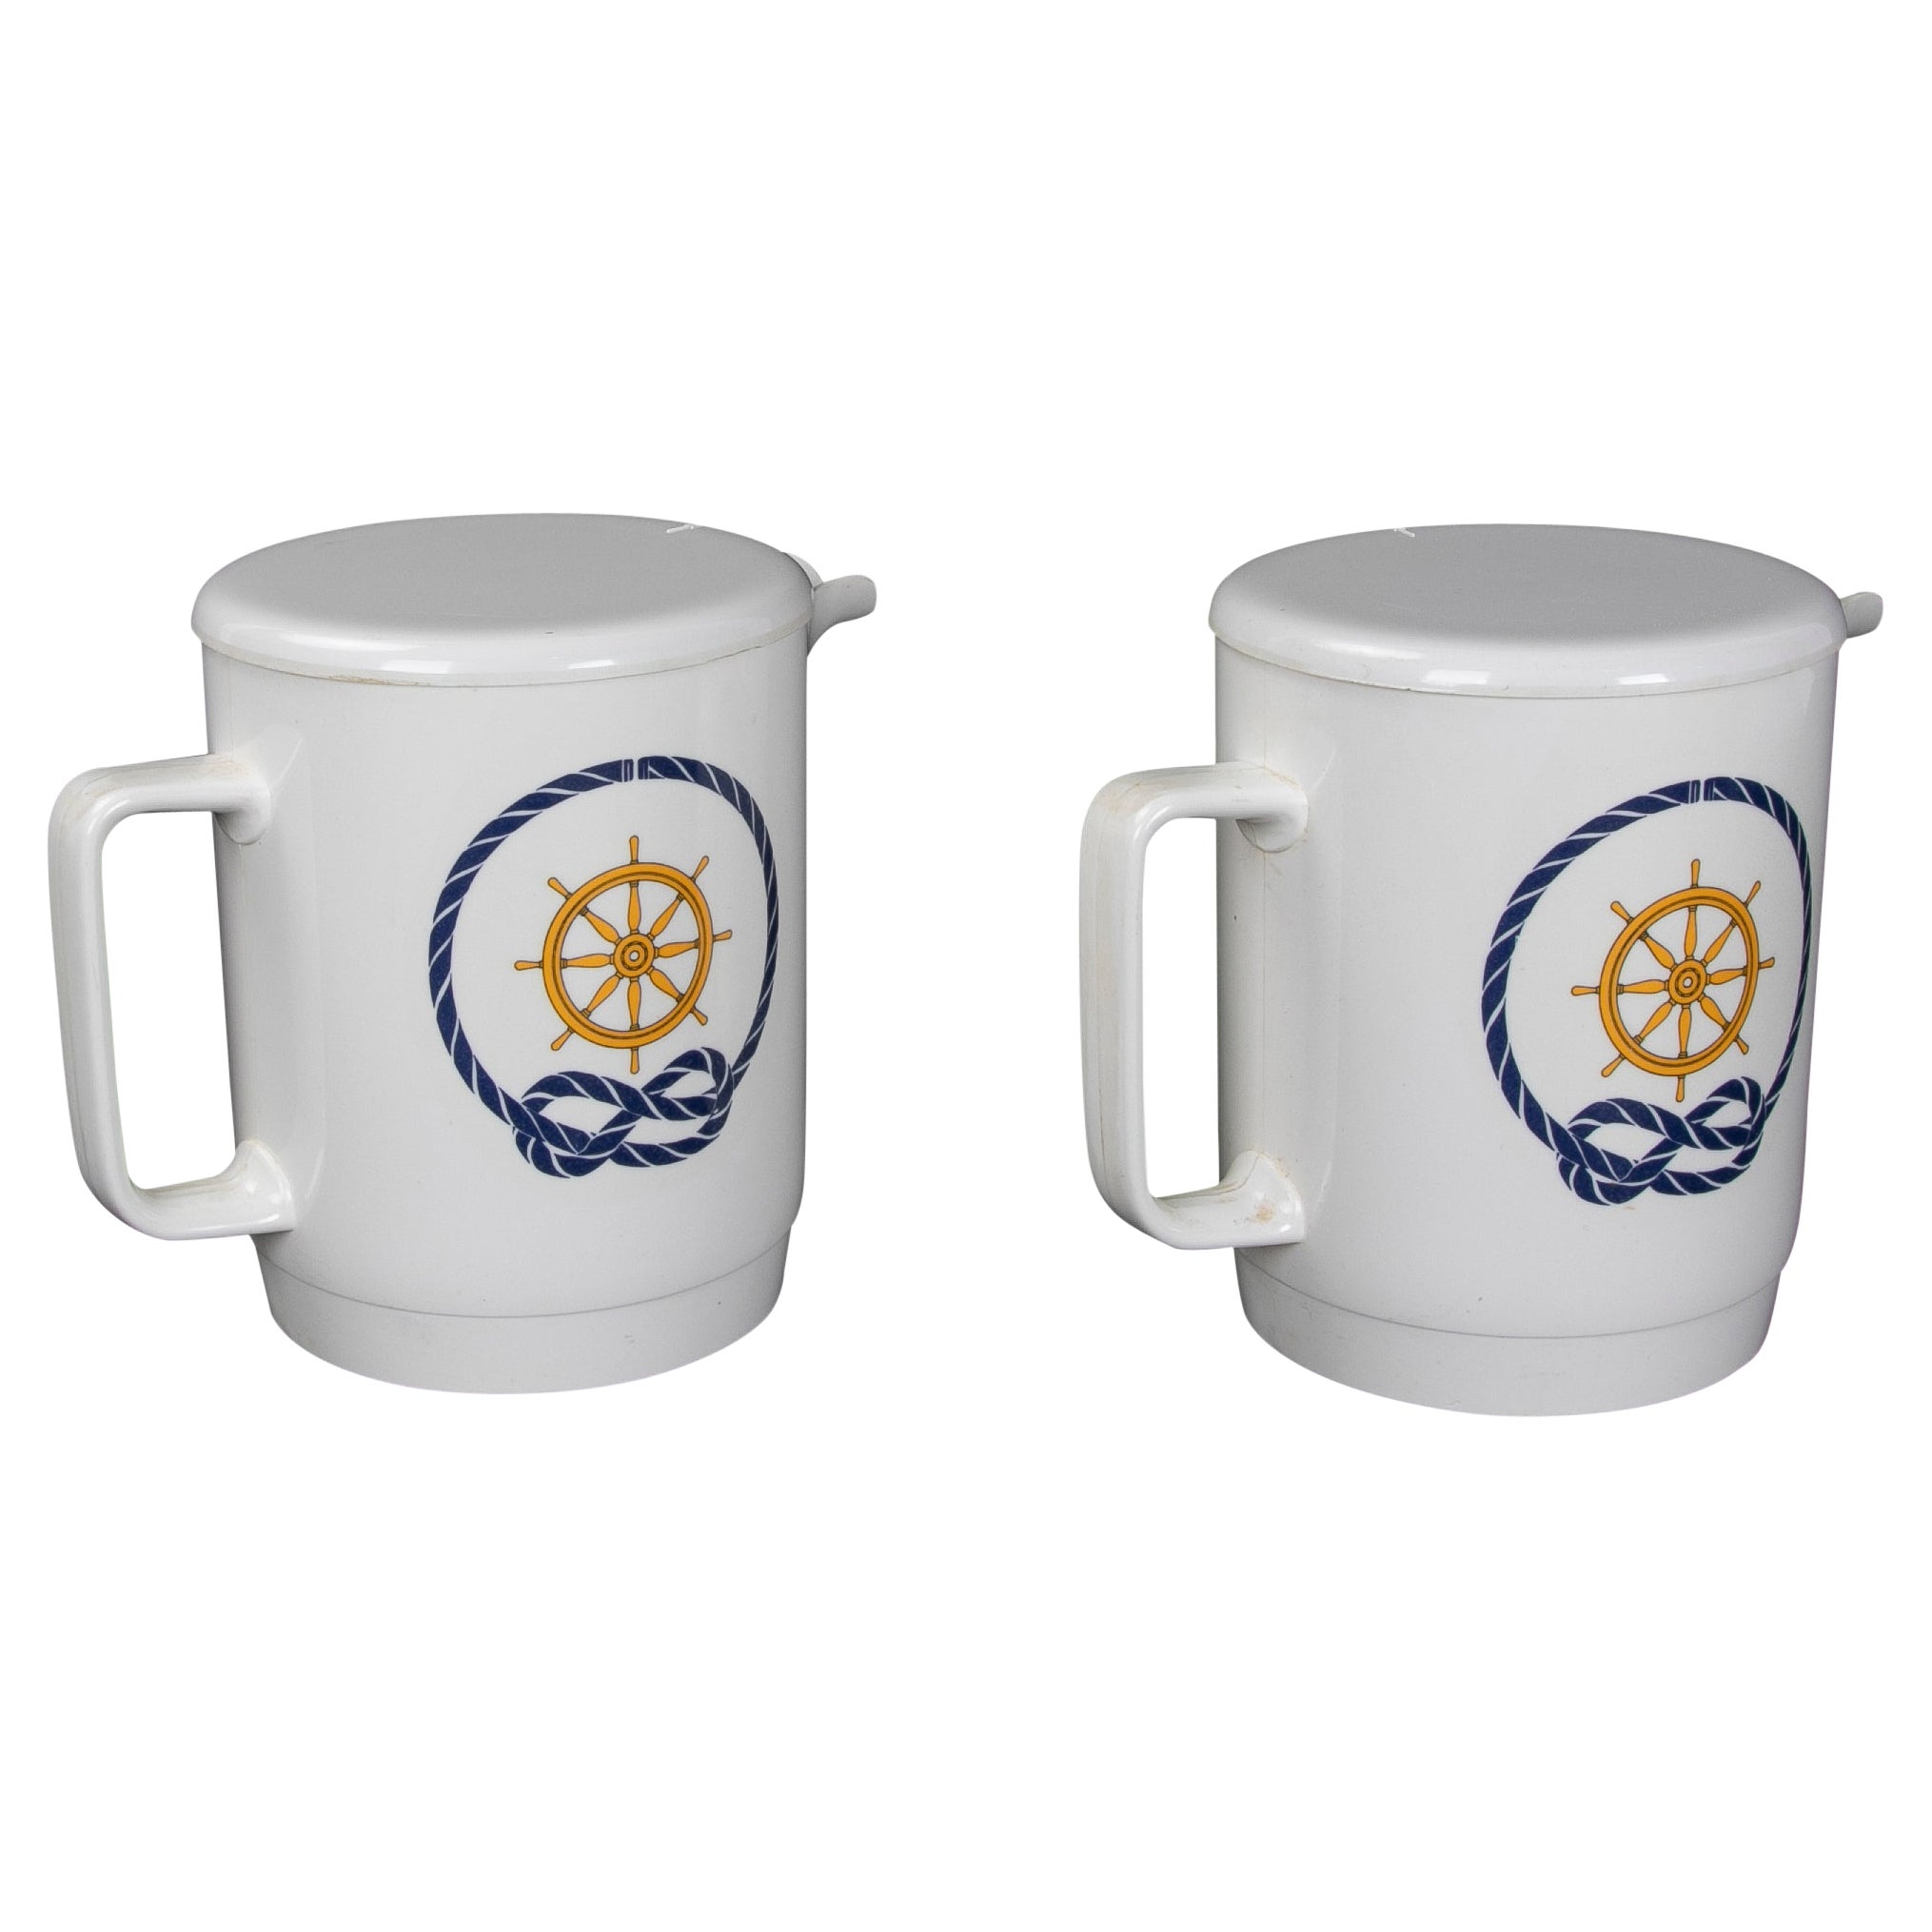 1980s Pair of Boat Mugs with Sailor Decoration Design by a. Opel For Sale